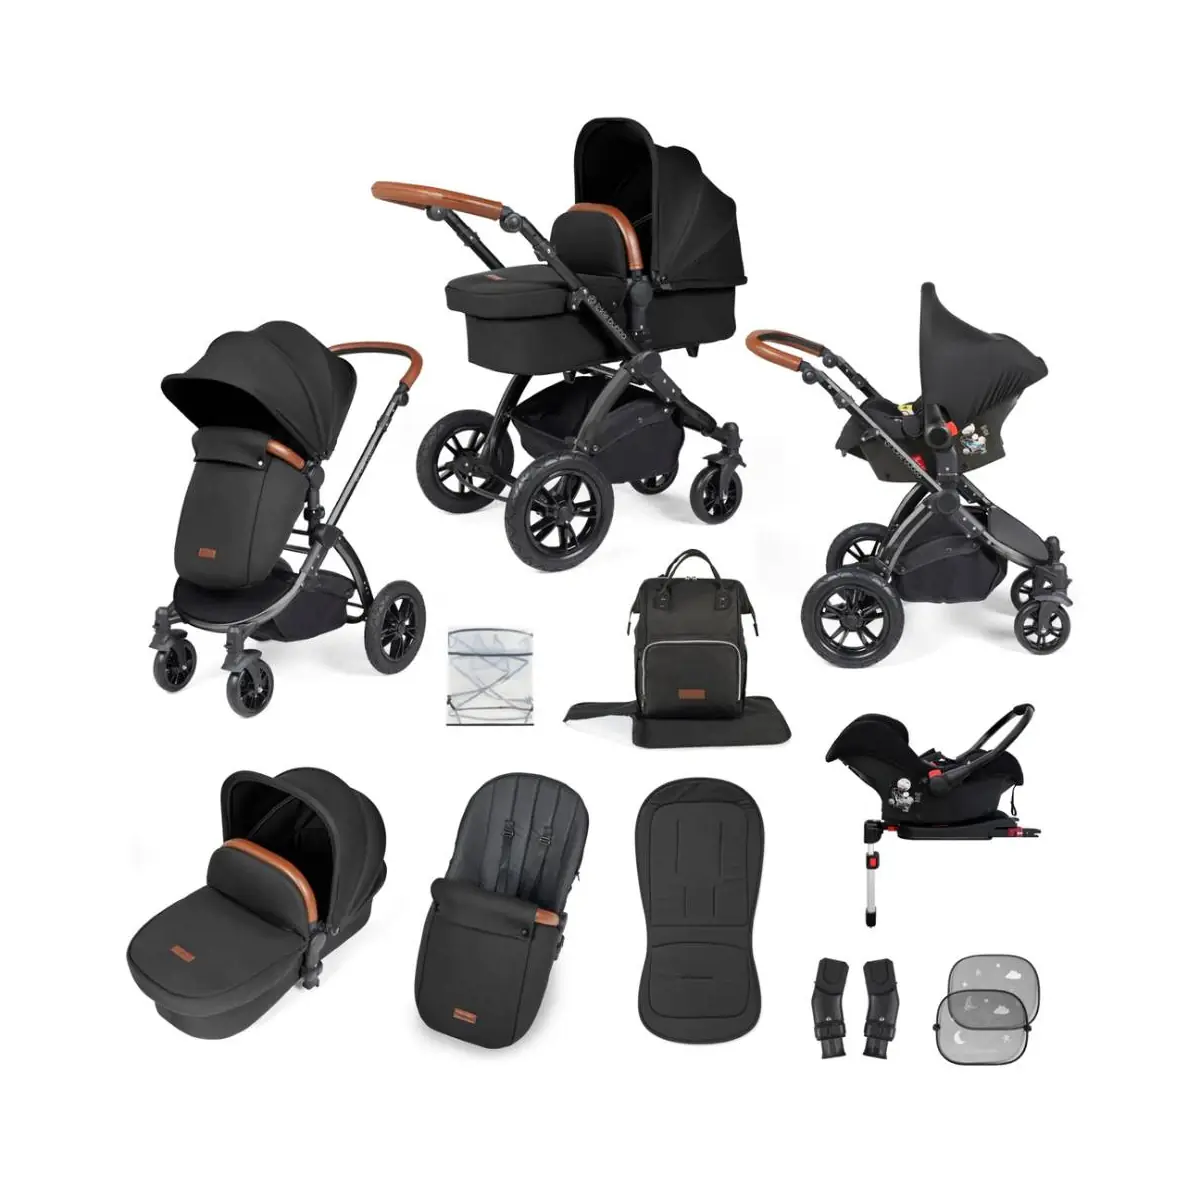 Image of Ickle Bubba Stomp Luxe Black Frame Travel System with Galaxy Carseat & Isofix Base - Black/Midnight/Tan